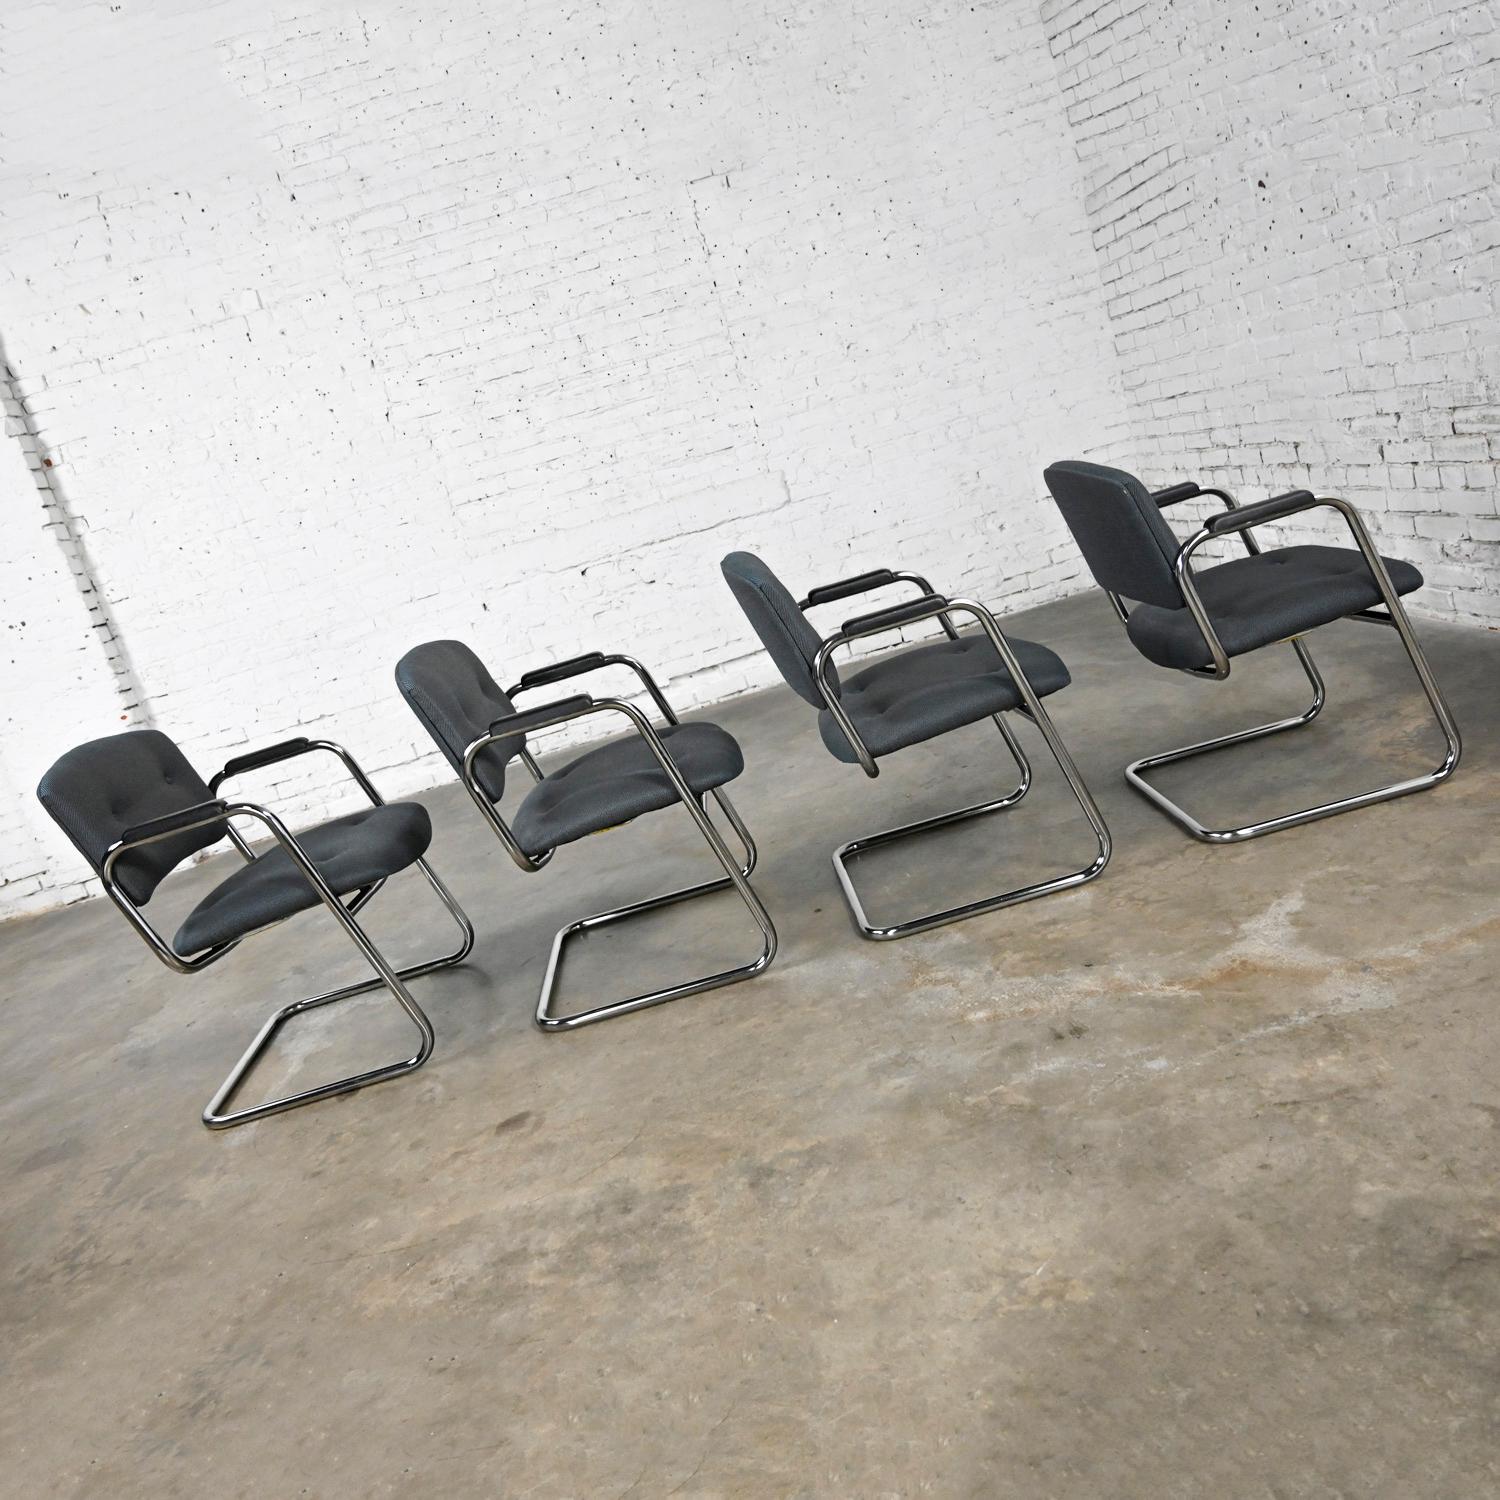 Late 20th Century Gray & Chrome Cantilever Chairs Style Steelcase Set of 4 For Sale 2